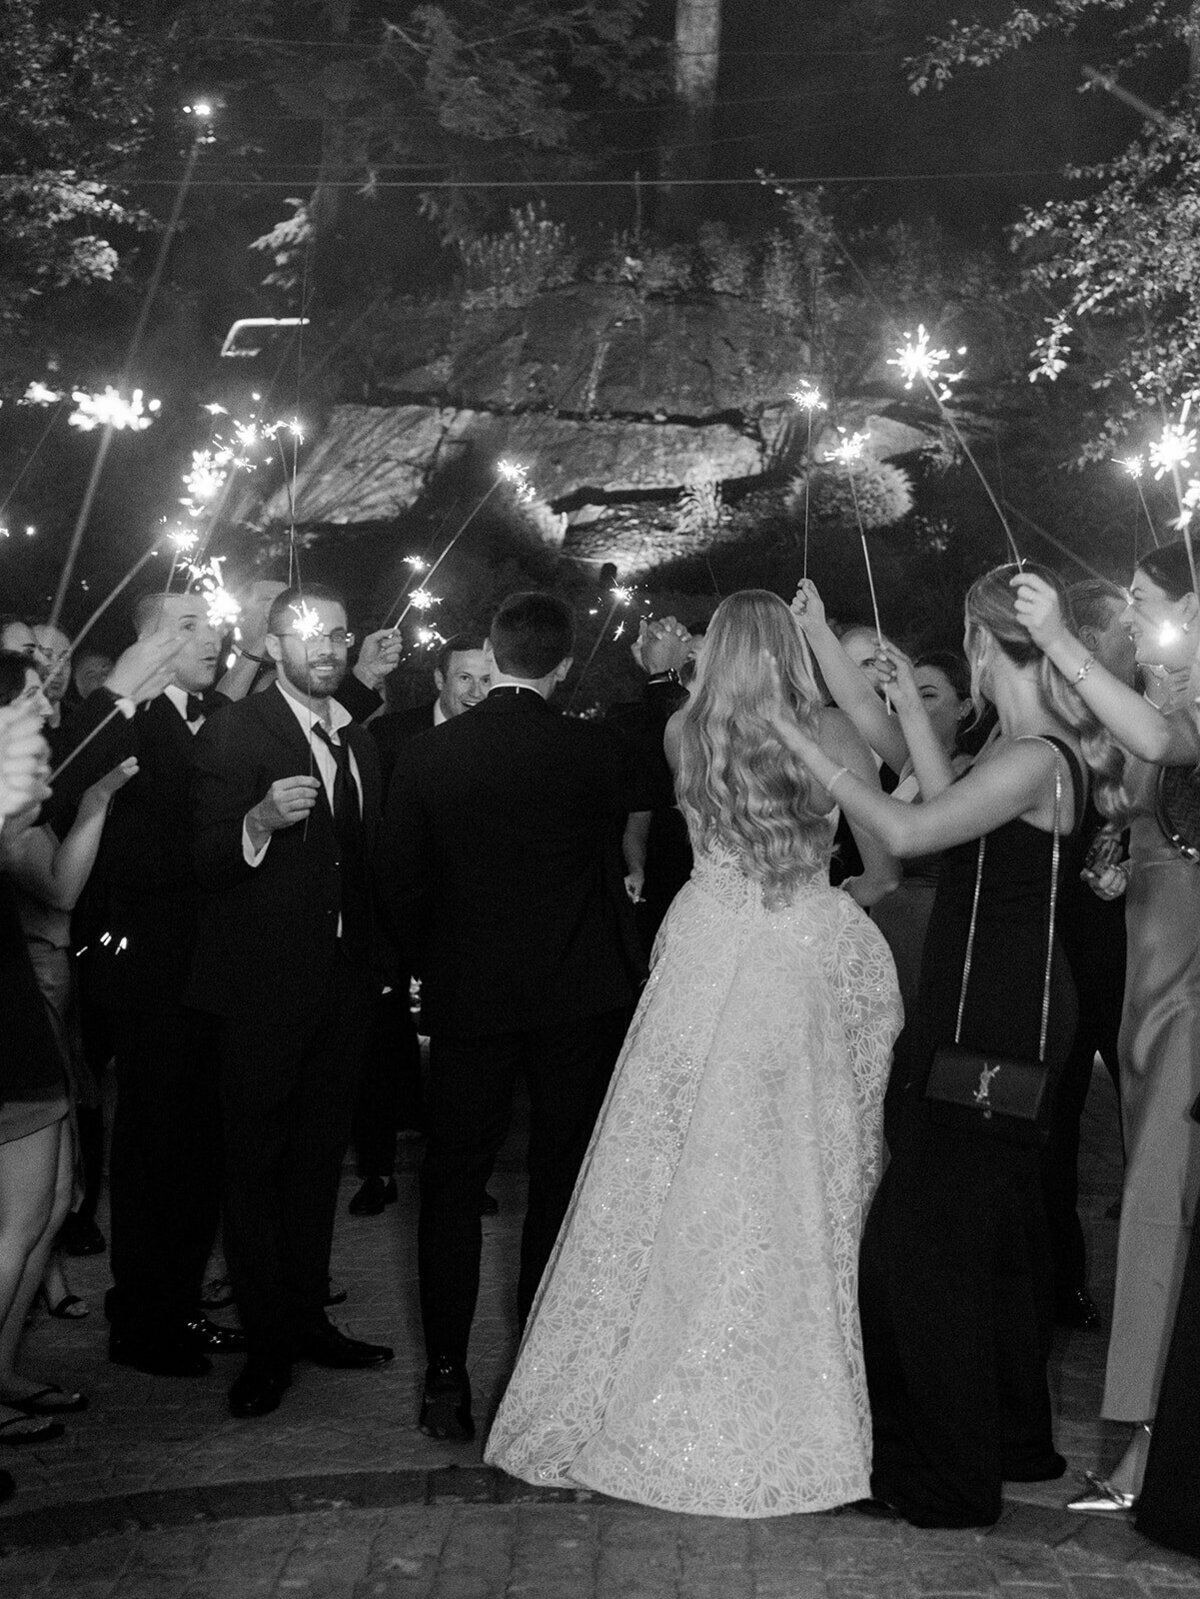 Bride and groom from the back of their sparkler exit surrounded by their friends and family.